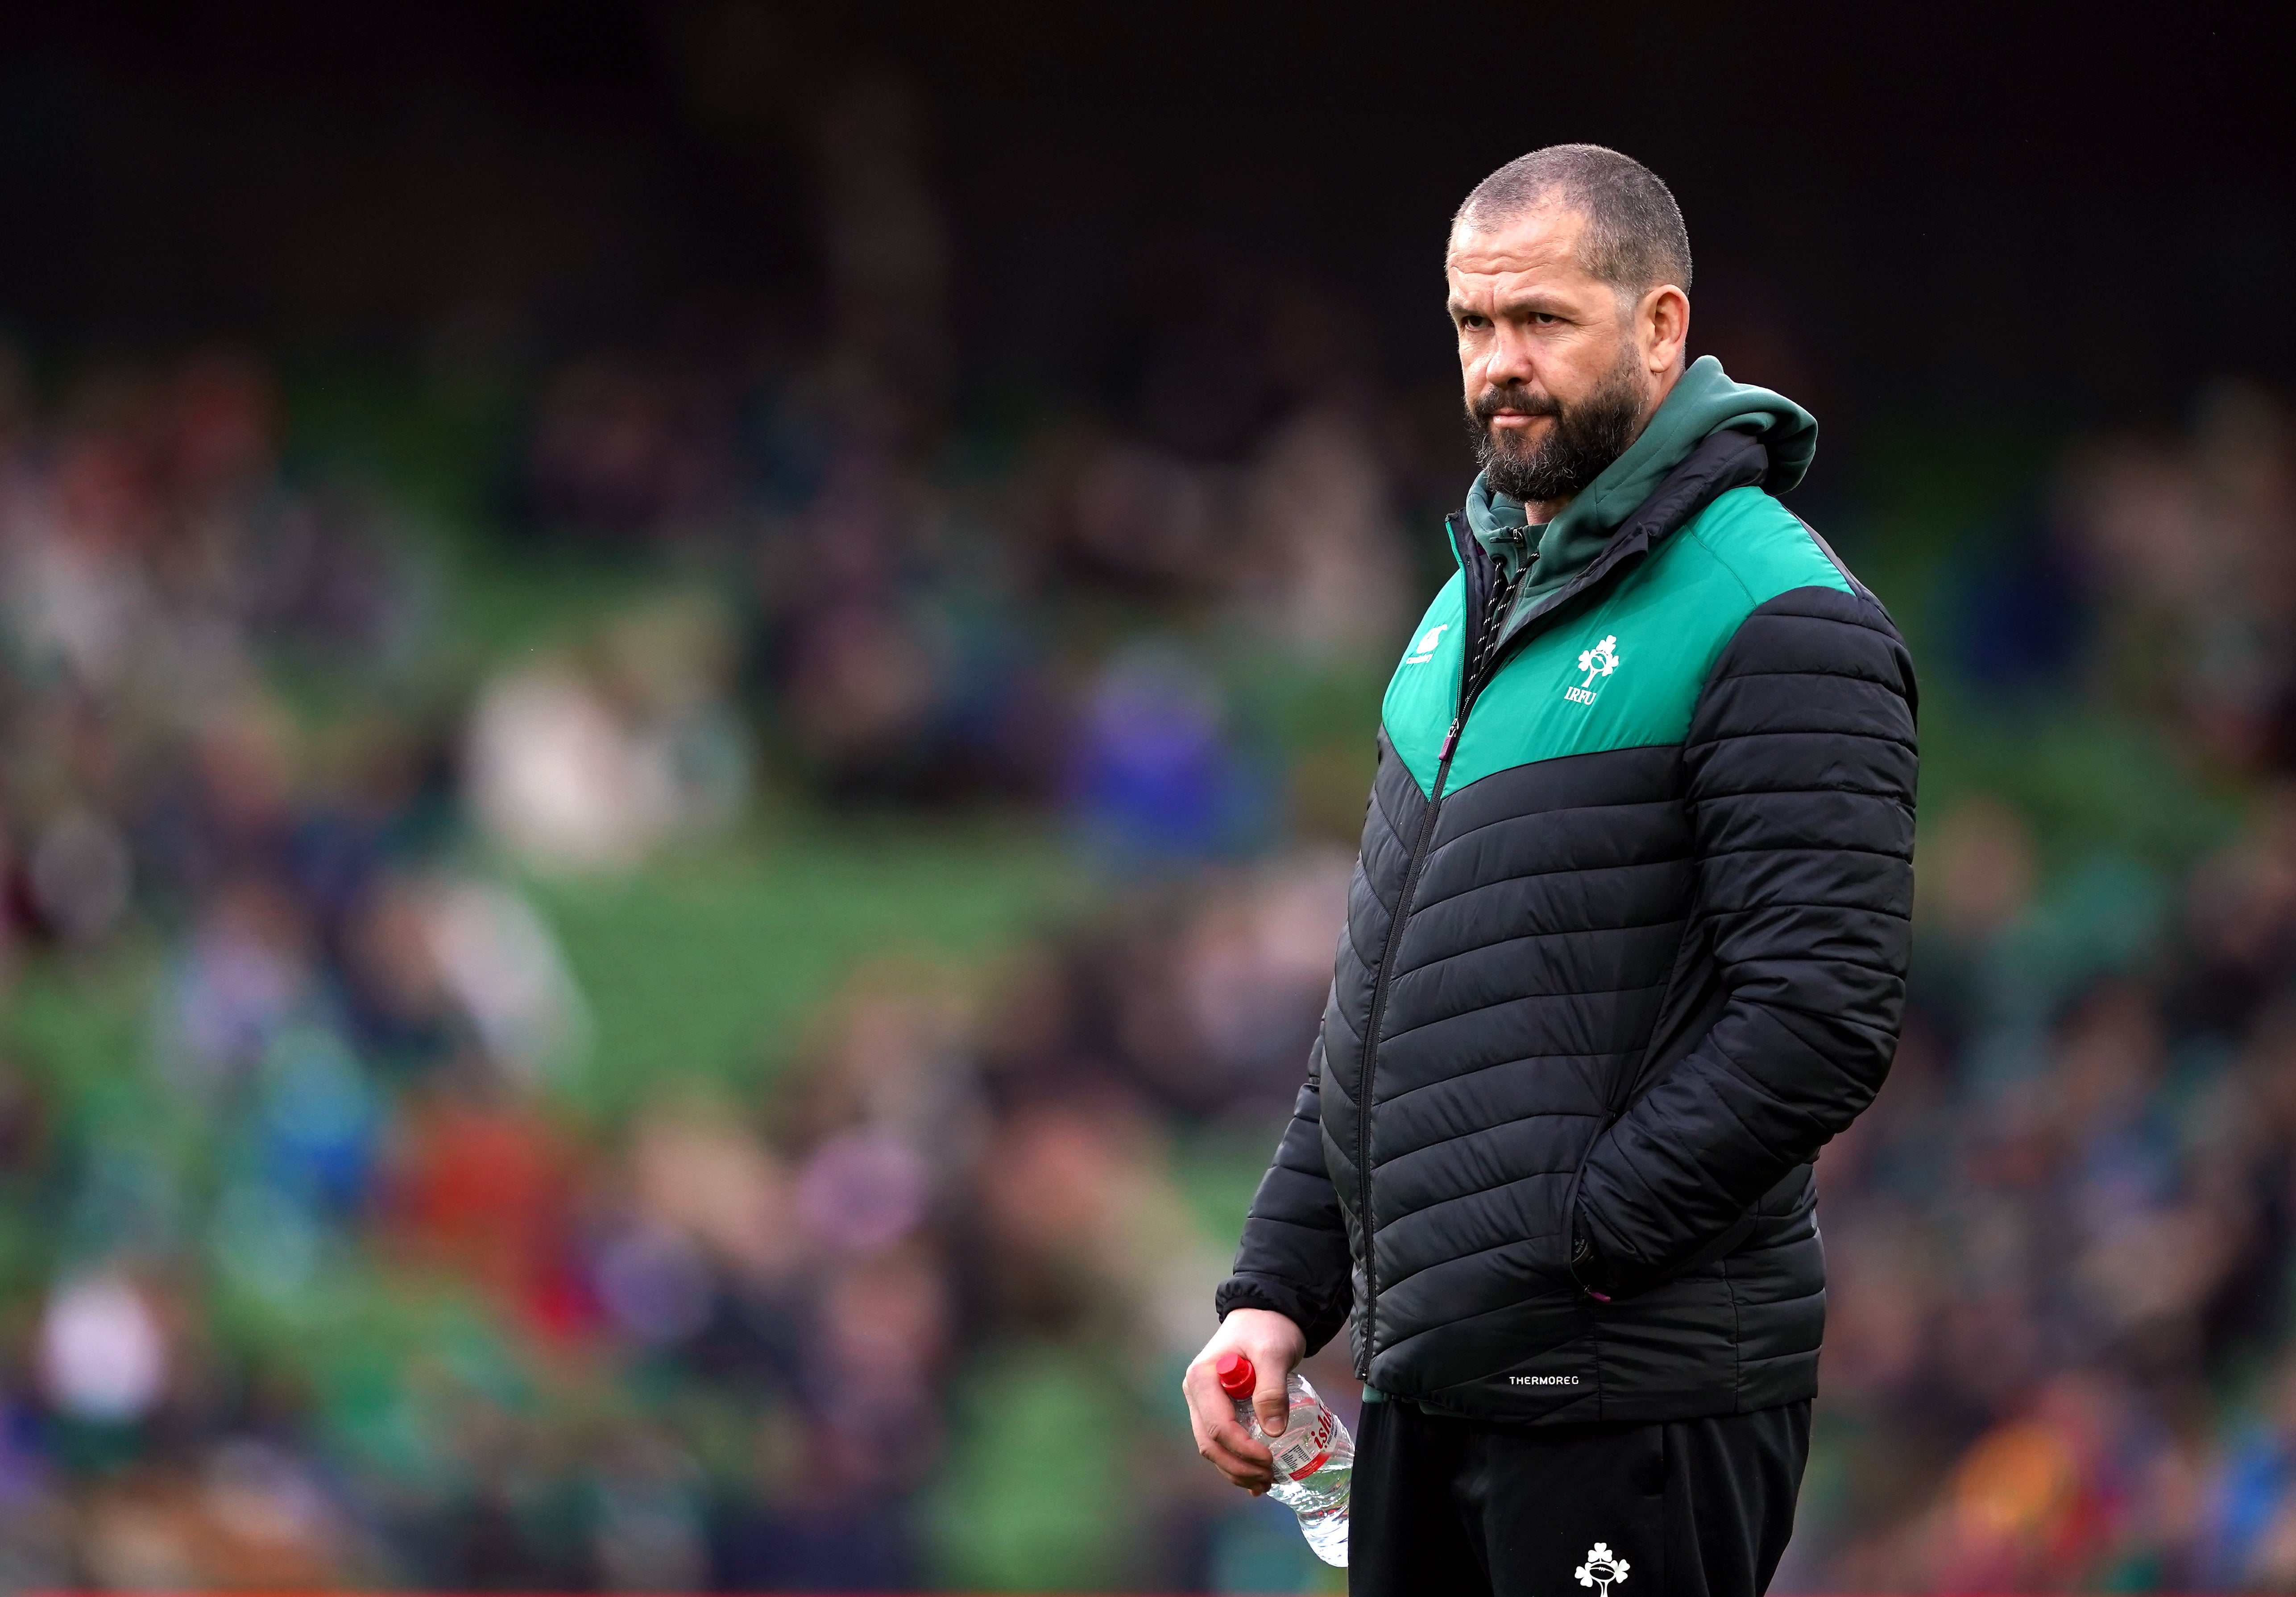 Andy Farrell, pictured, has overseen a steady development in an impressive-looking Ireland side (Brian Lawless/PA)